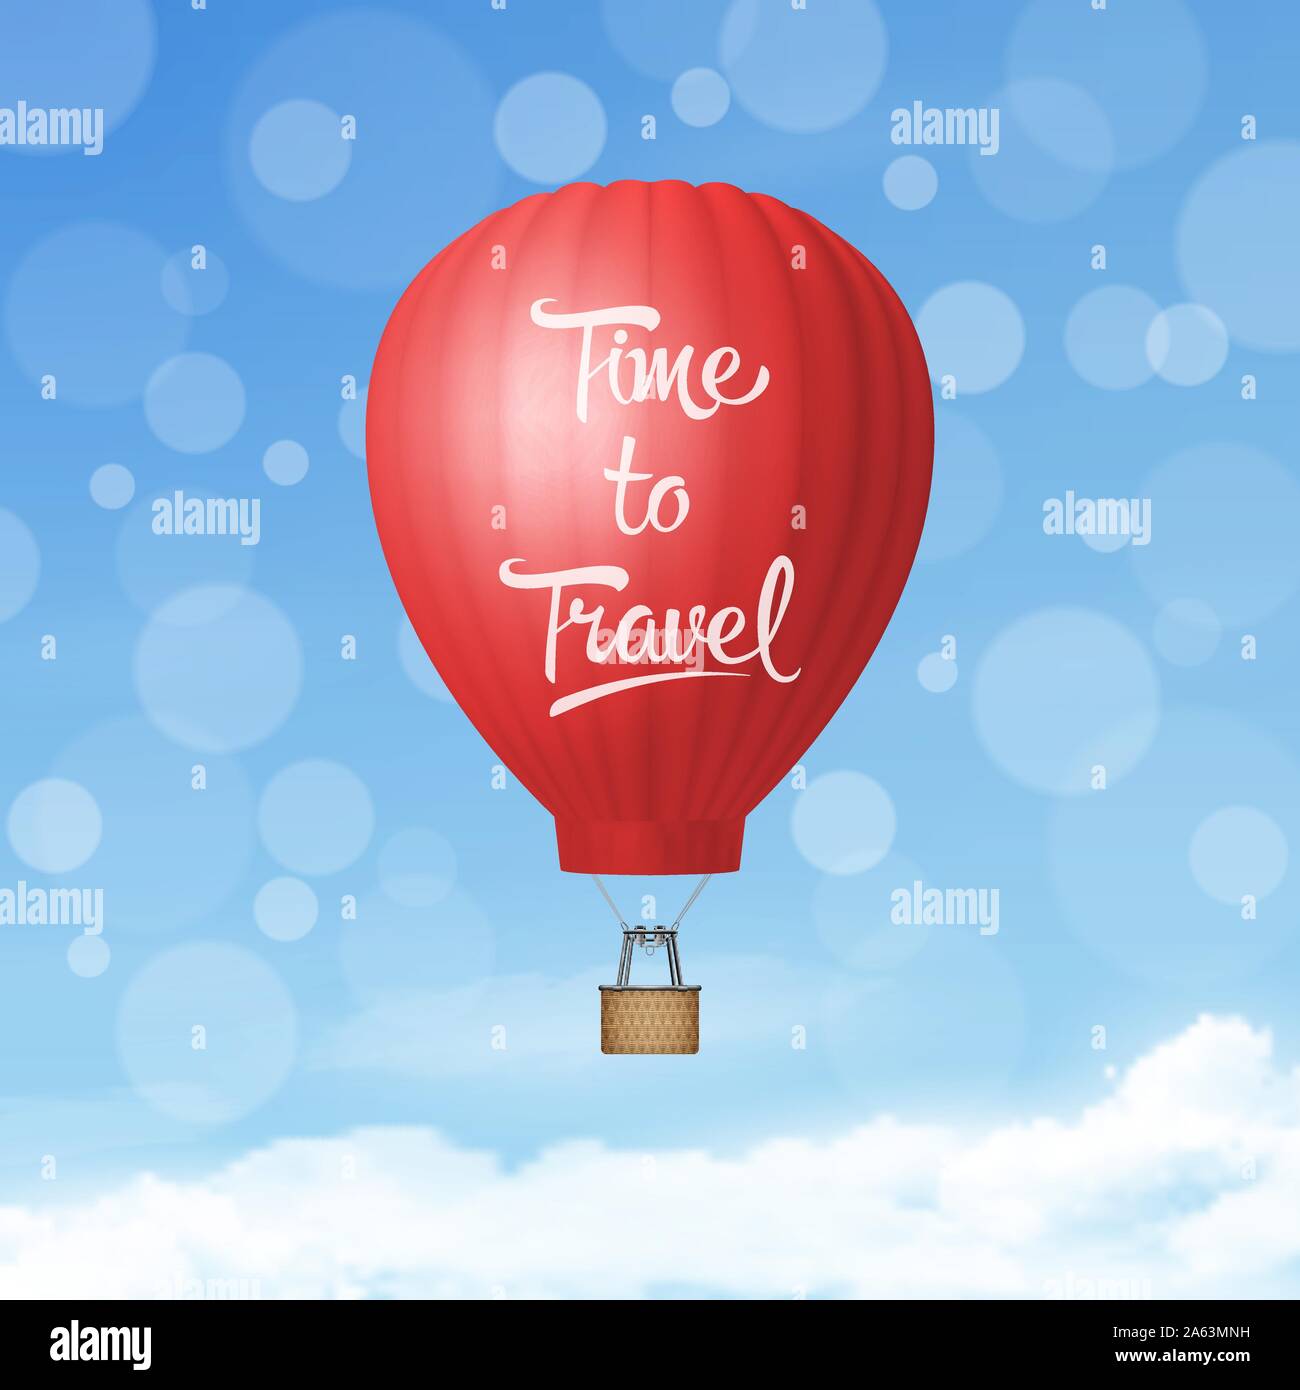 Vector 3d Realistic Red Hot Air Balloon on Blue Sky Background. Time to Travel. Design Template of Blank Aerostat for Summer Vacation, Travelling Stock Vector